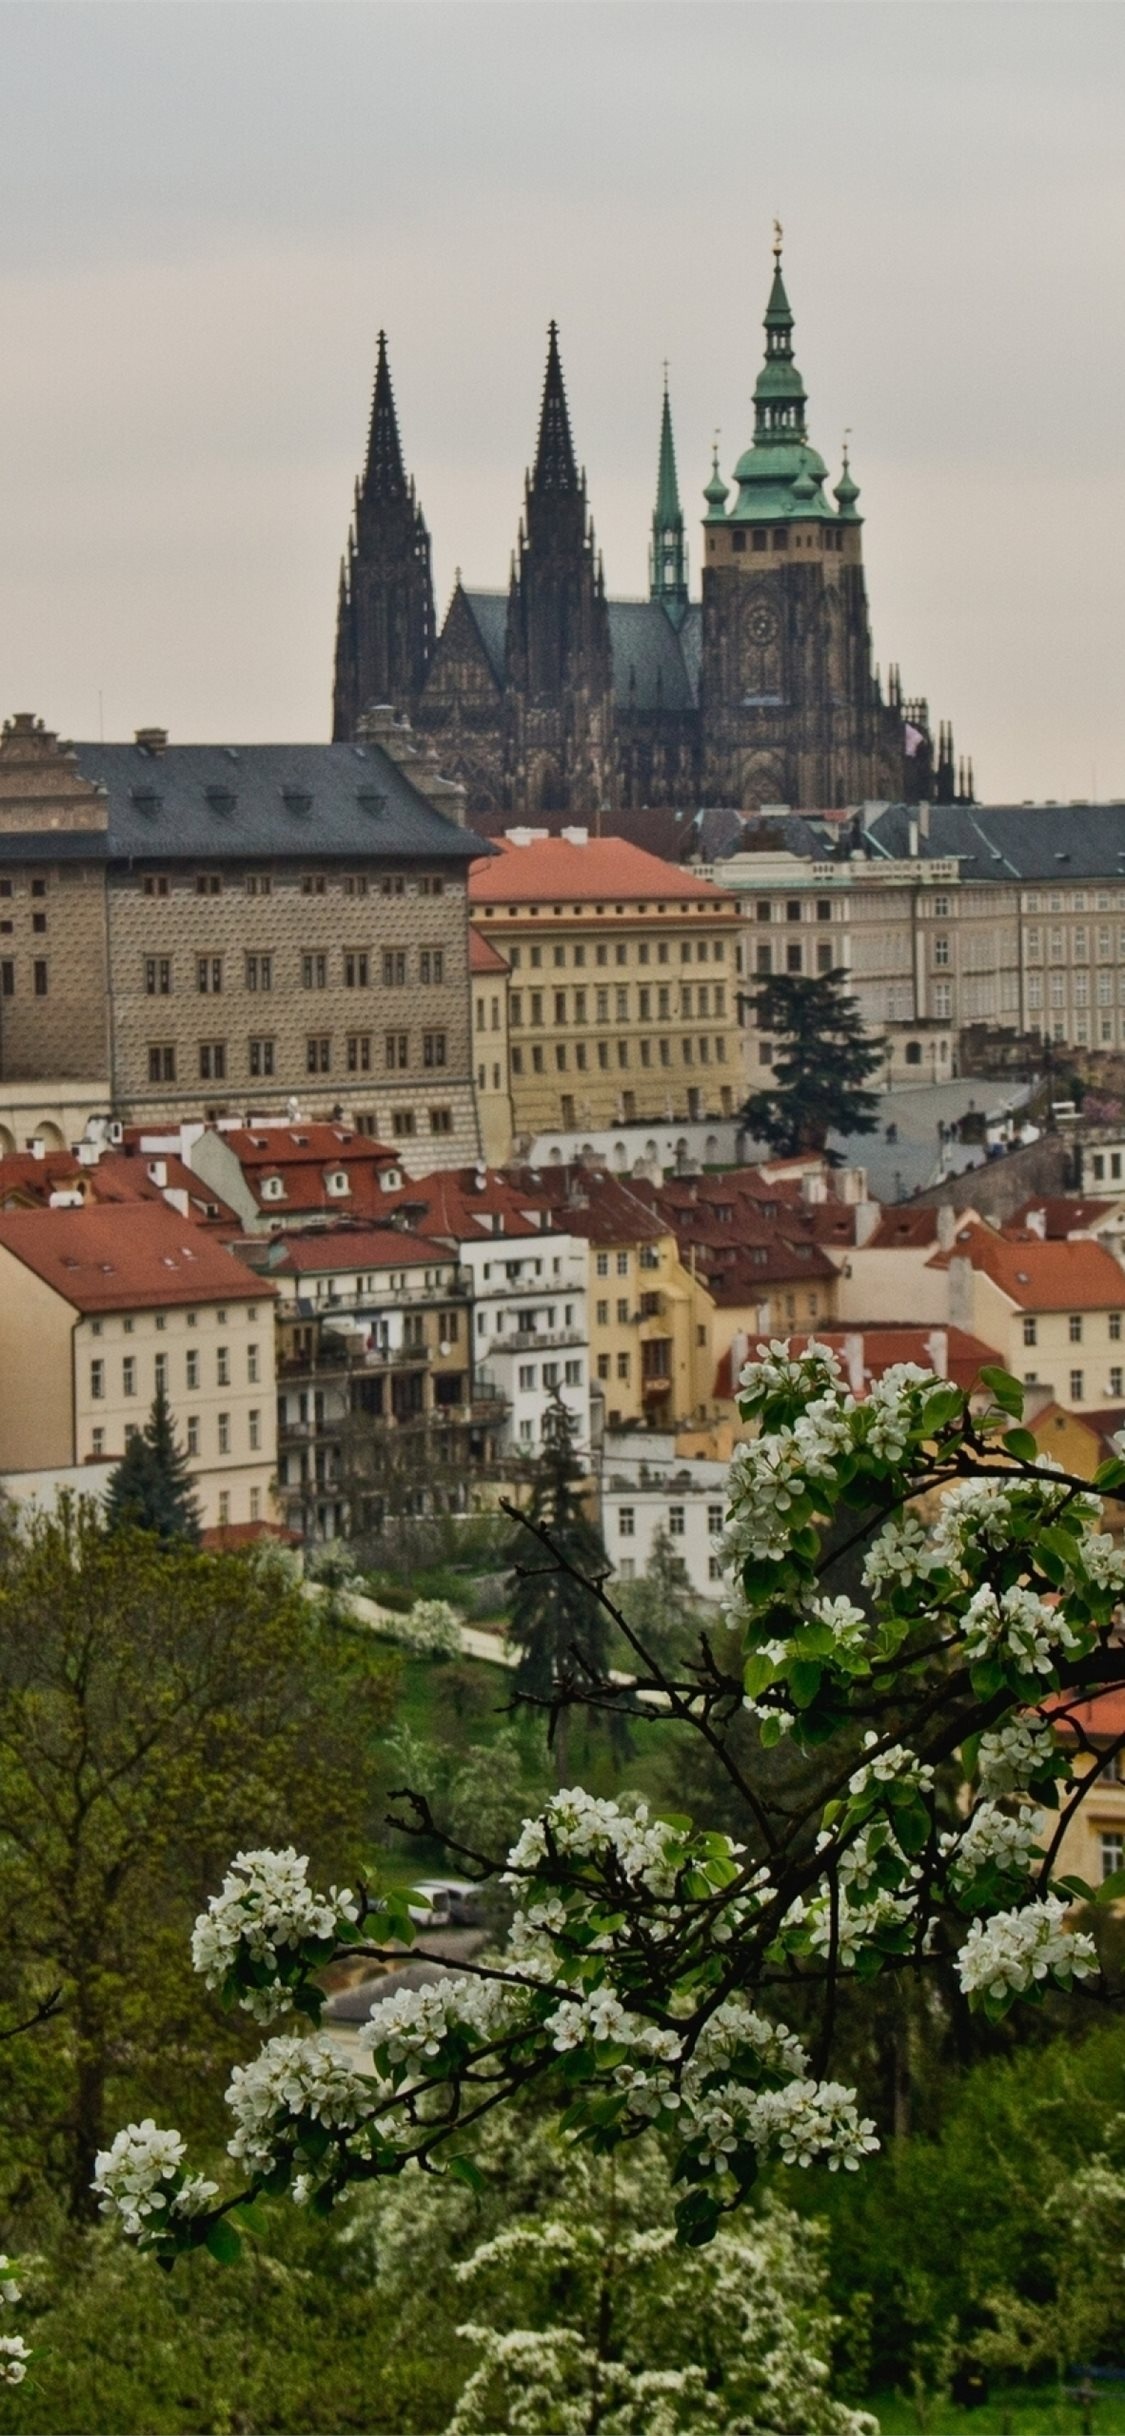 Czechia (Czech Republic): St. Vitus Cathedral, The seat of the Archbishop of Prague. 1130x2440 HD Wallpaper.